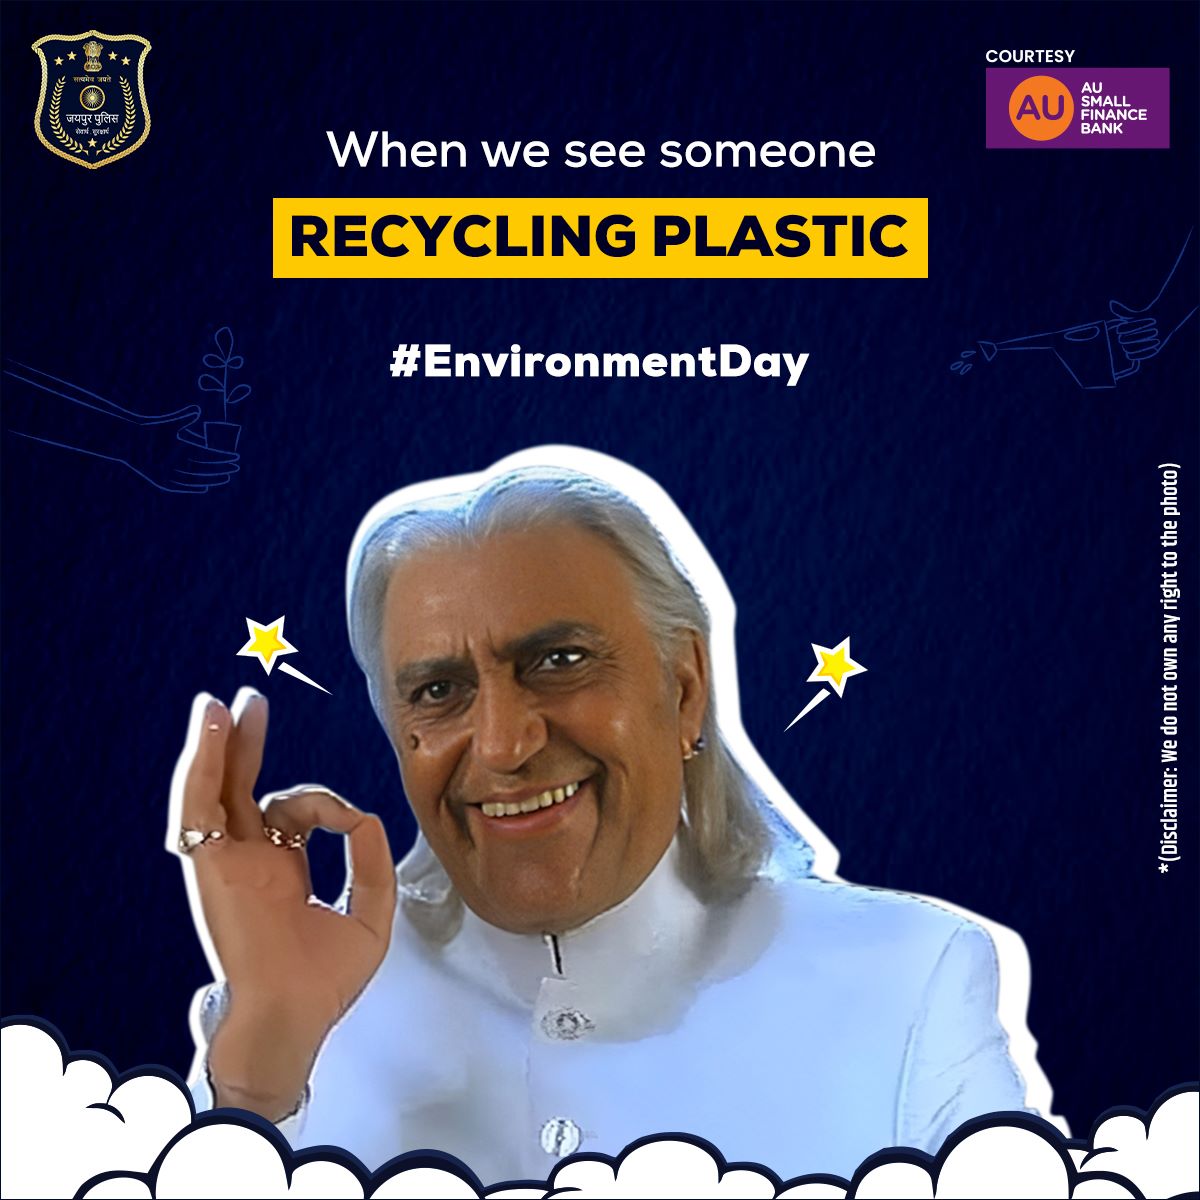 Recycle, because being trashy isn't cool! Let's make recycling the hottest trend of the season. 💚🌍 

#RecyclePlastic #EcoChic #EnvironmentDay #EcoFriendly #SustainableLiving #JaipurPolice #JaipurPoliceAtWork